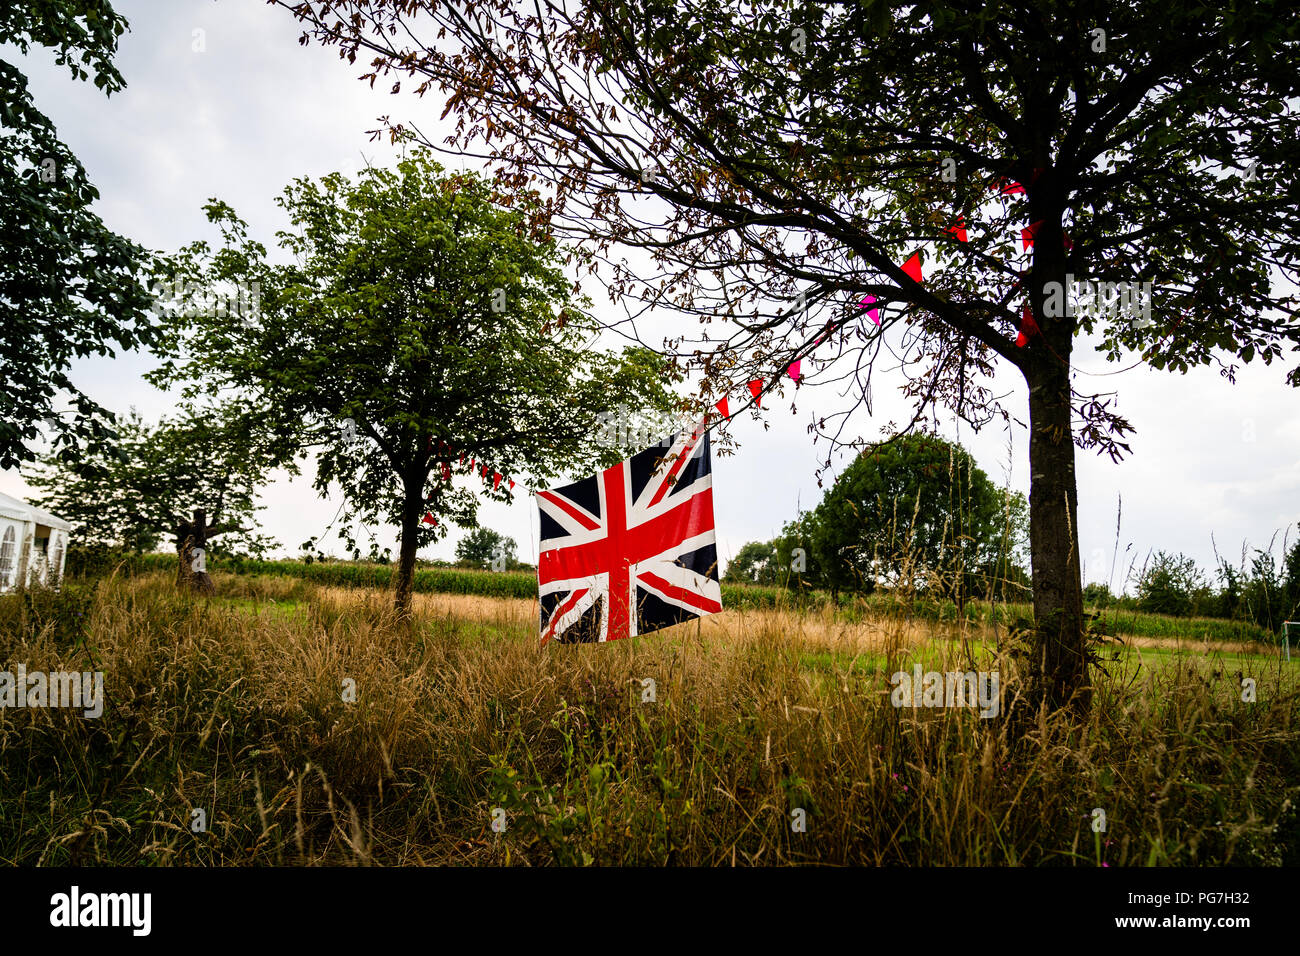 Union Jack flag stretched between trees Stock Photo